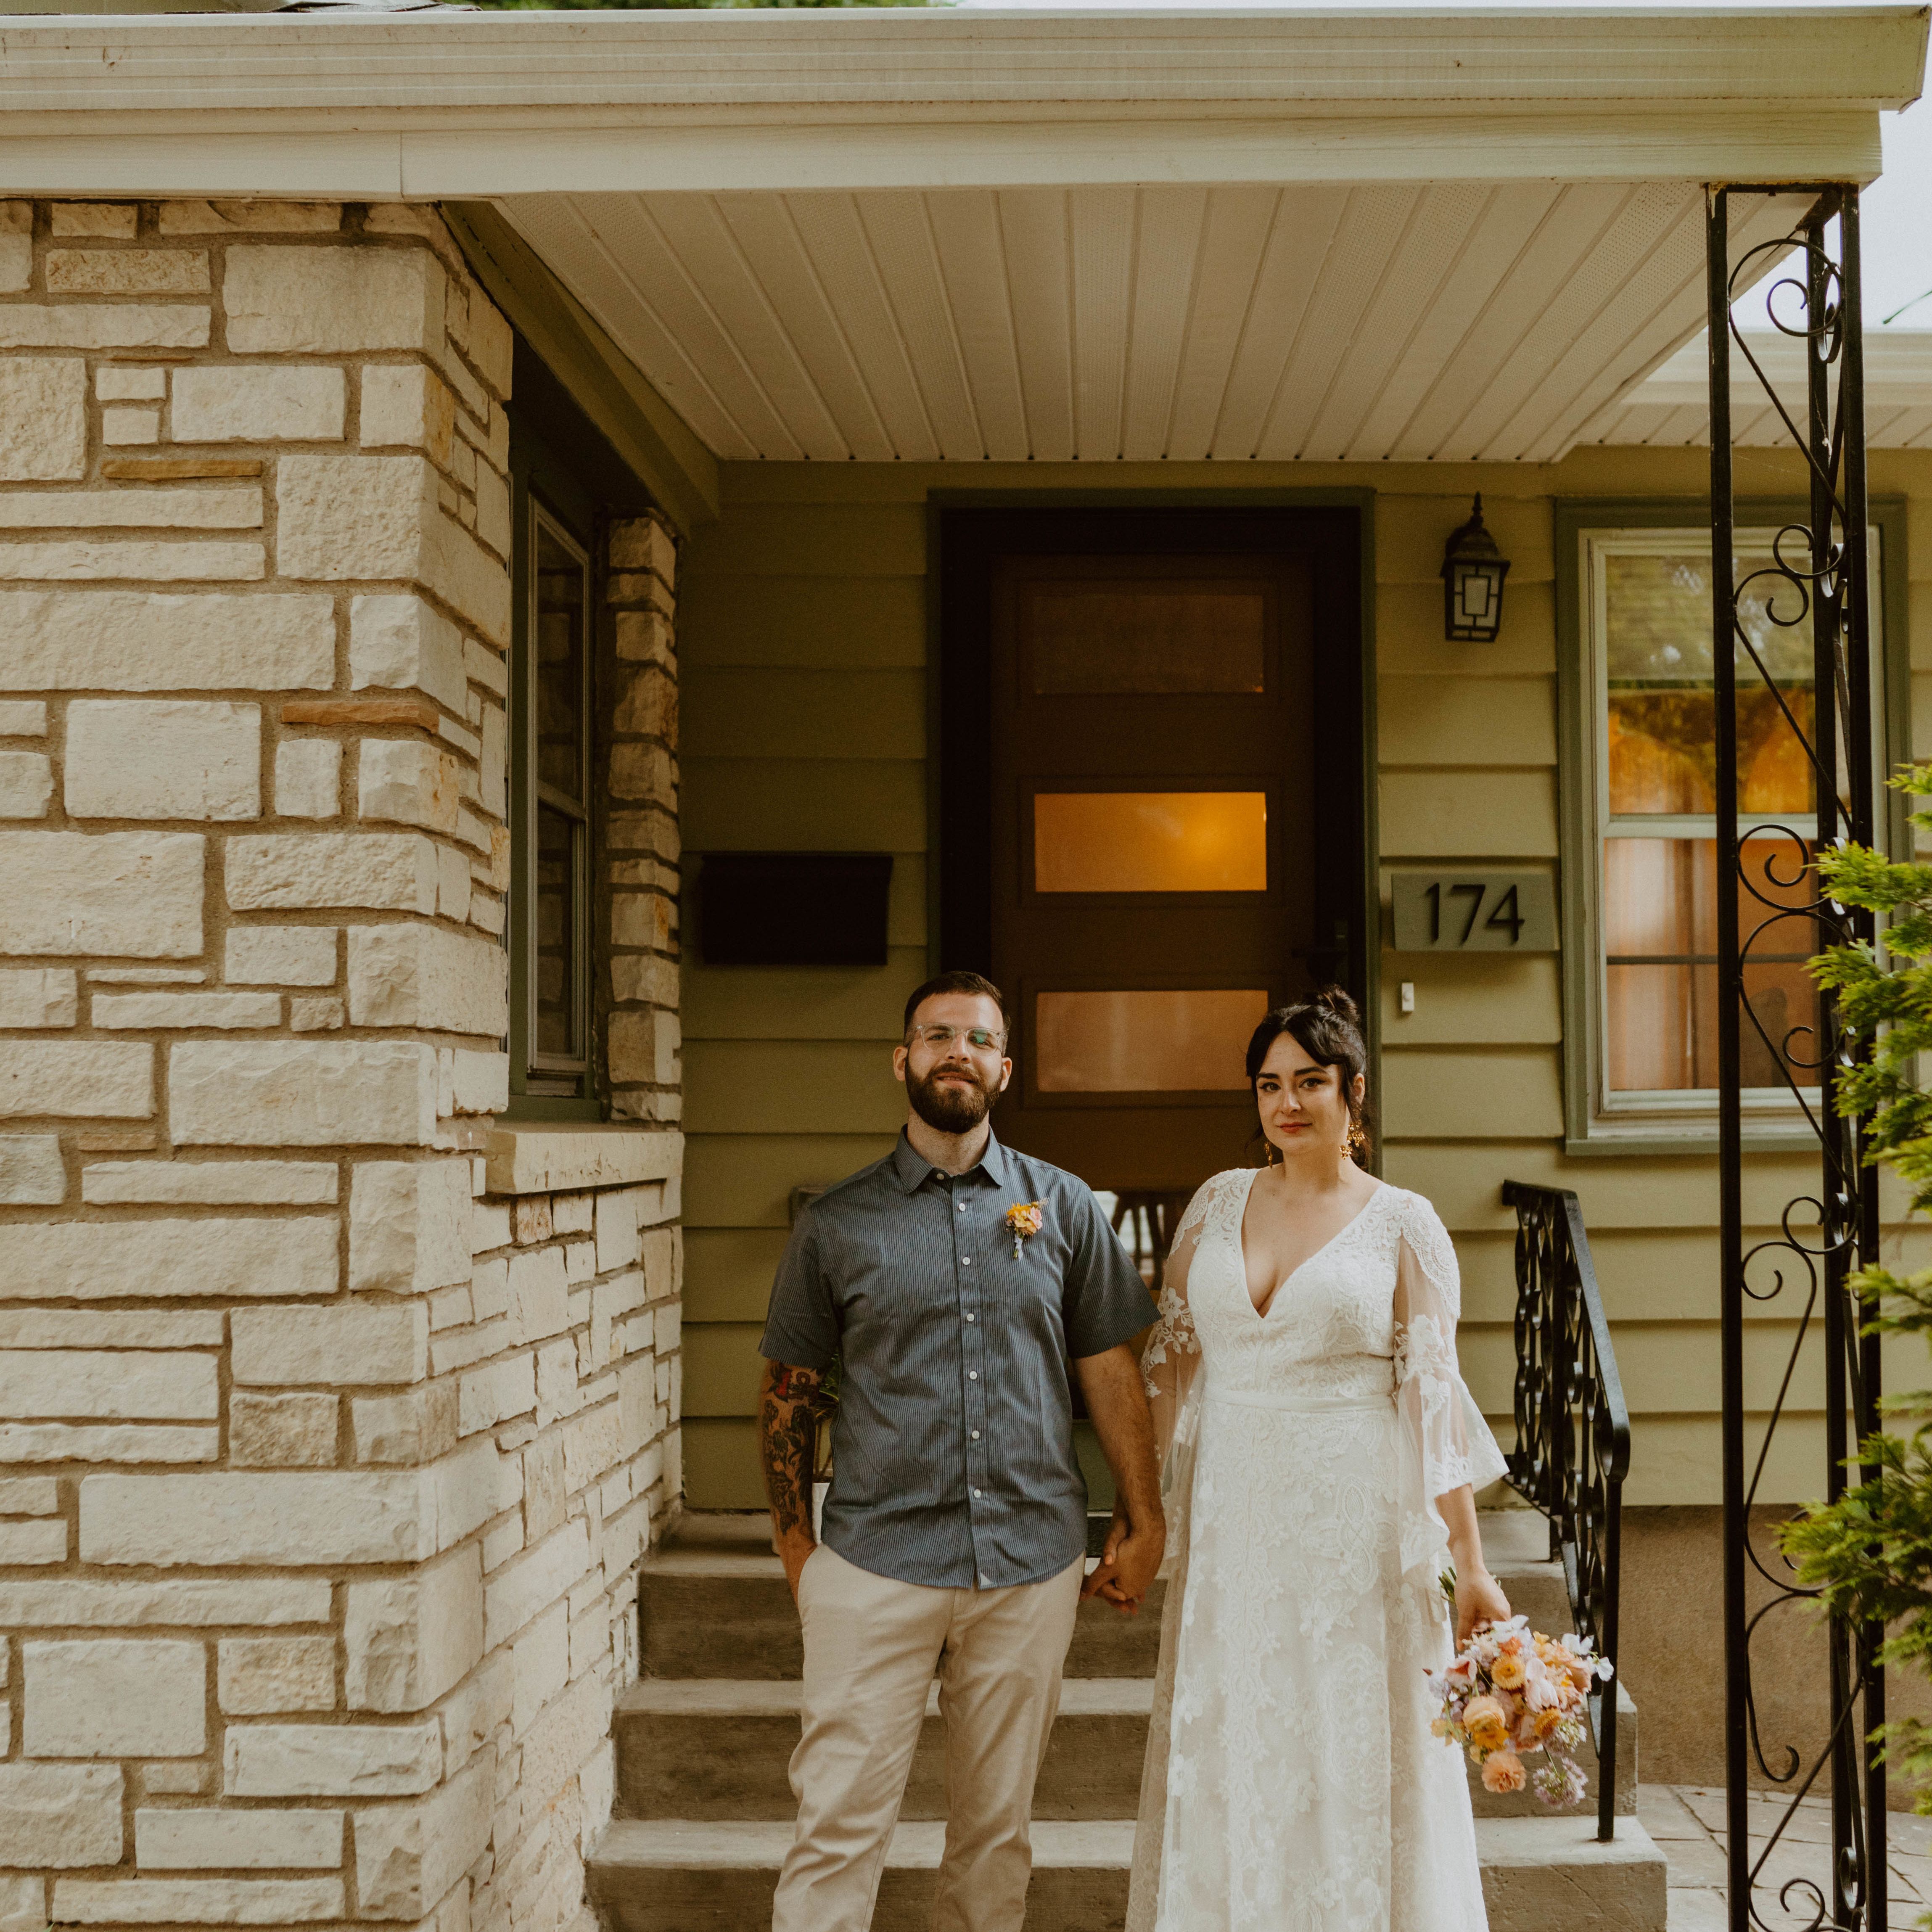 These Newlyweds Turned Their First Home into a Cozy Bungalow